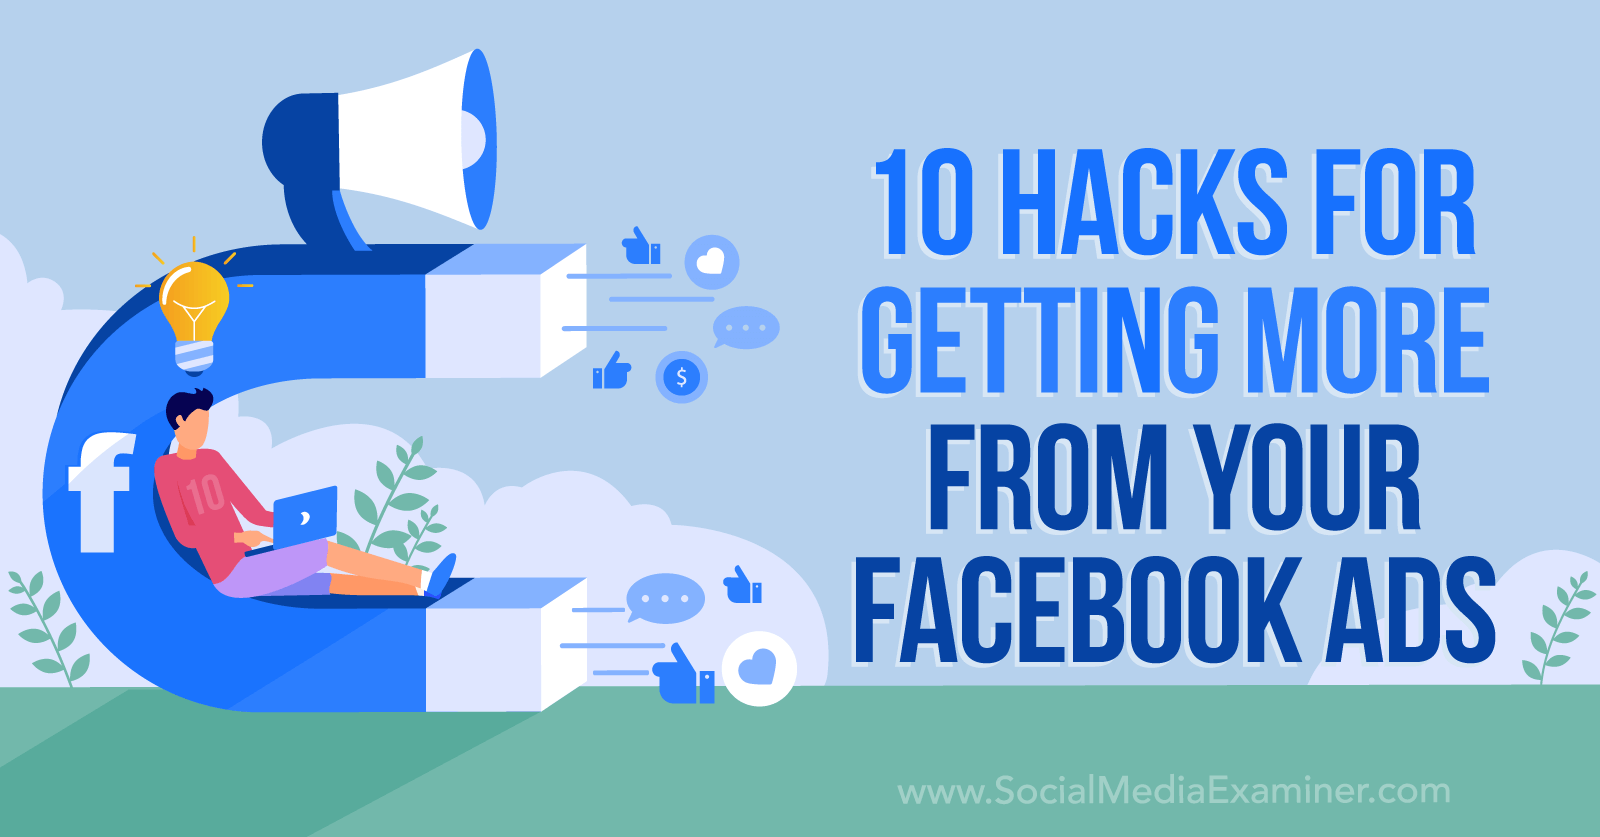 10 Hacks for Getting More From Your Facebook Ads : Social Media Examiner